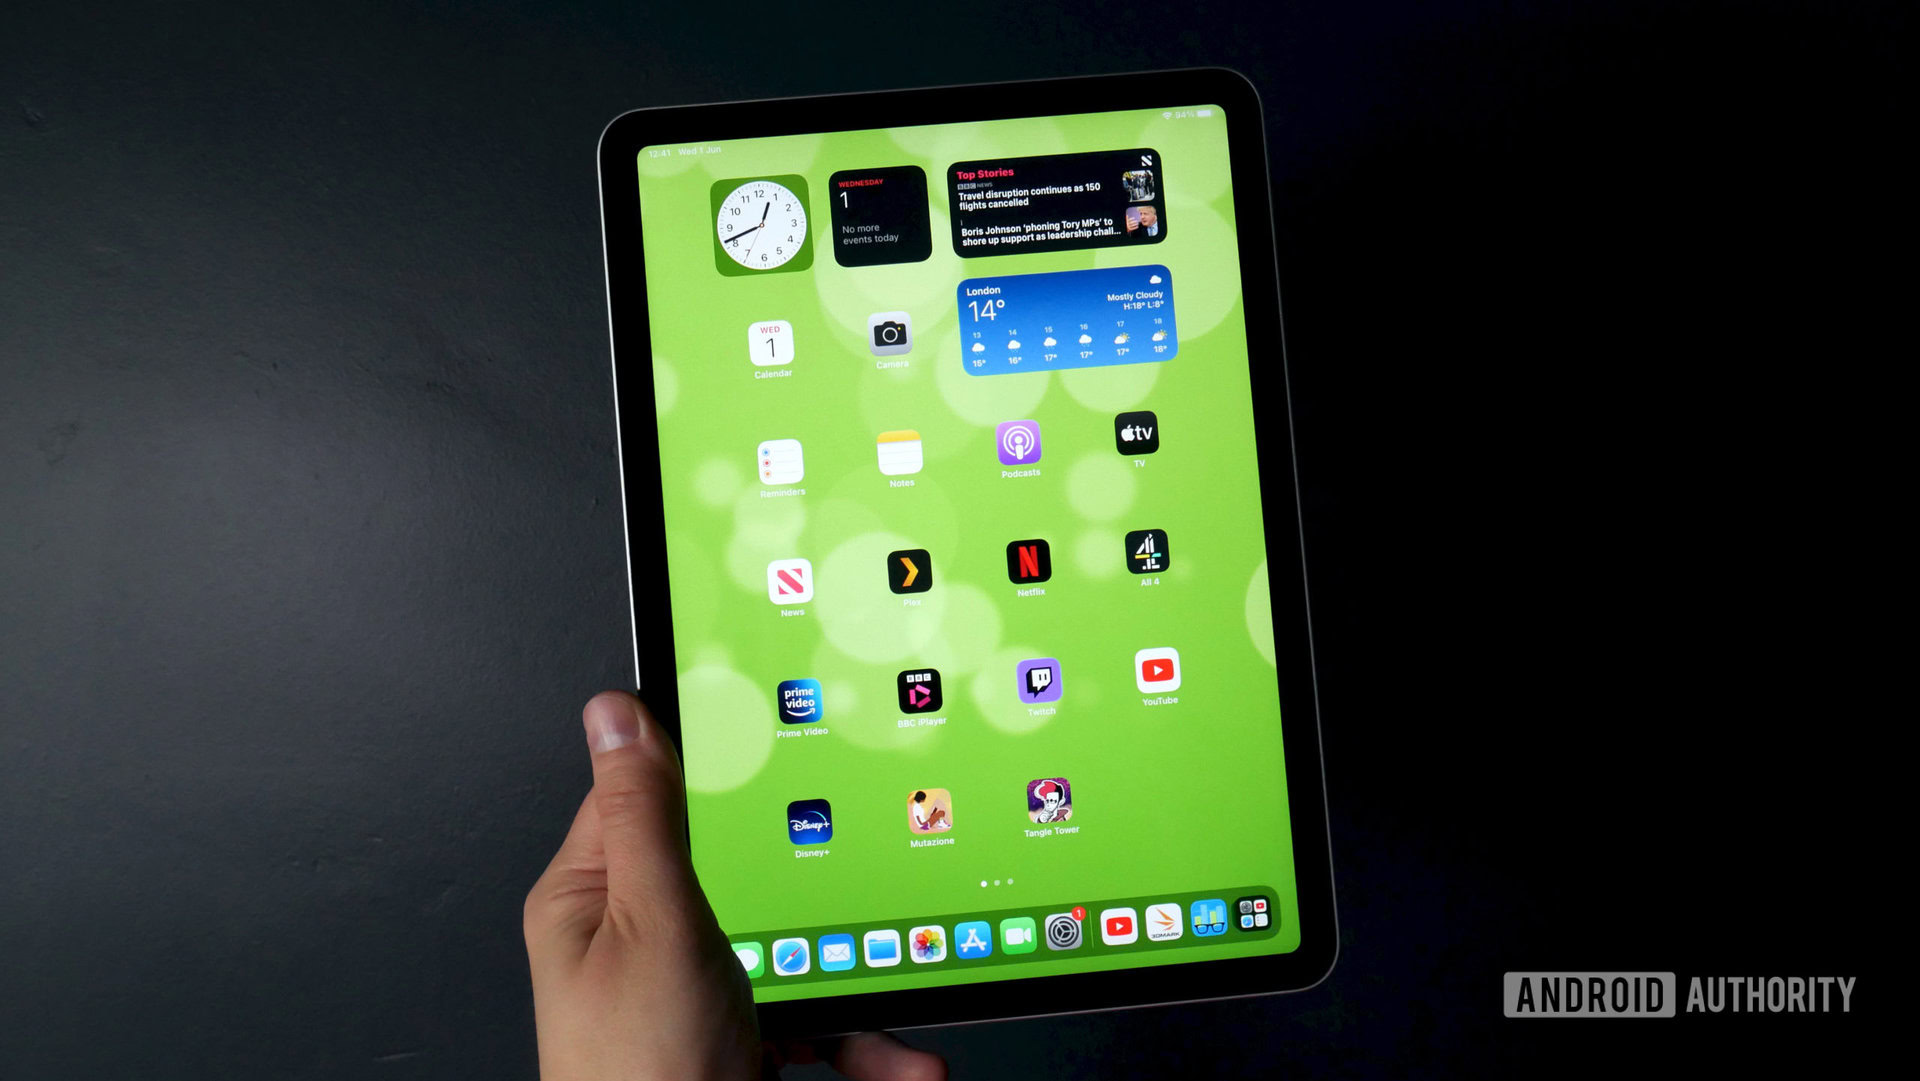 The 2022 iPad Air is even more tempting at a $499.99 deal price